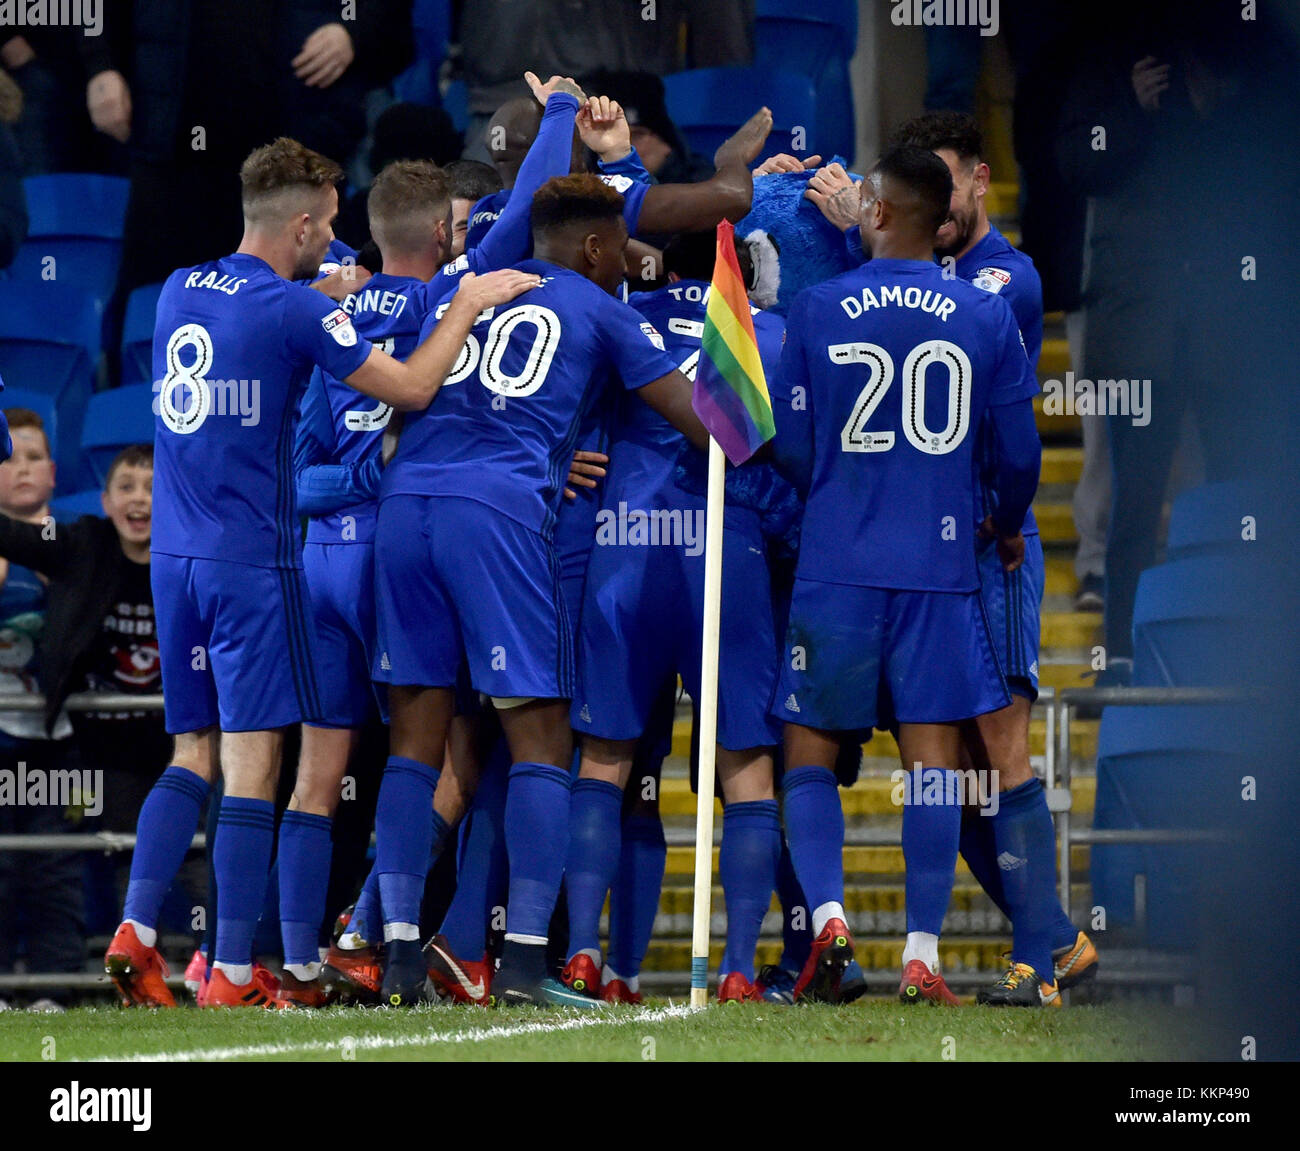 Cardiff City's Junior Hoilett is mobbed by team-mates after scoring his sides second goal of the game during the Sky Bet Championship match at the Cardiff City Stadium, Cardiff. PRESS ASSOCIATION Photo Picture date: Friday December 1, 2017. See PA story SOCCER Cardiff. Photo credit should read: Simon Galloway/PA Wire. RESTICTIONS: EDITORIAL USE ONLY No use with unauthorised audio, video, data, fixture lists, club/league logos or 'live' services. Online in-match use limited to 75 images, no video emulation. No use in betting, games or single club/league/player publications. Stock Photo